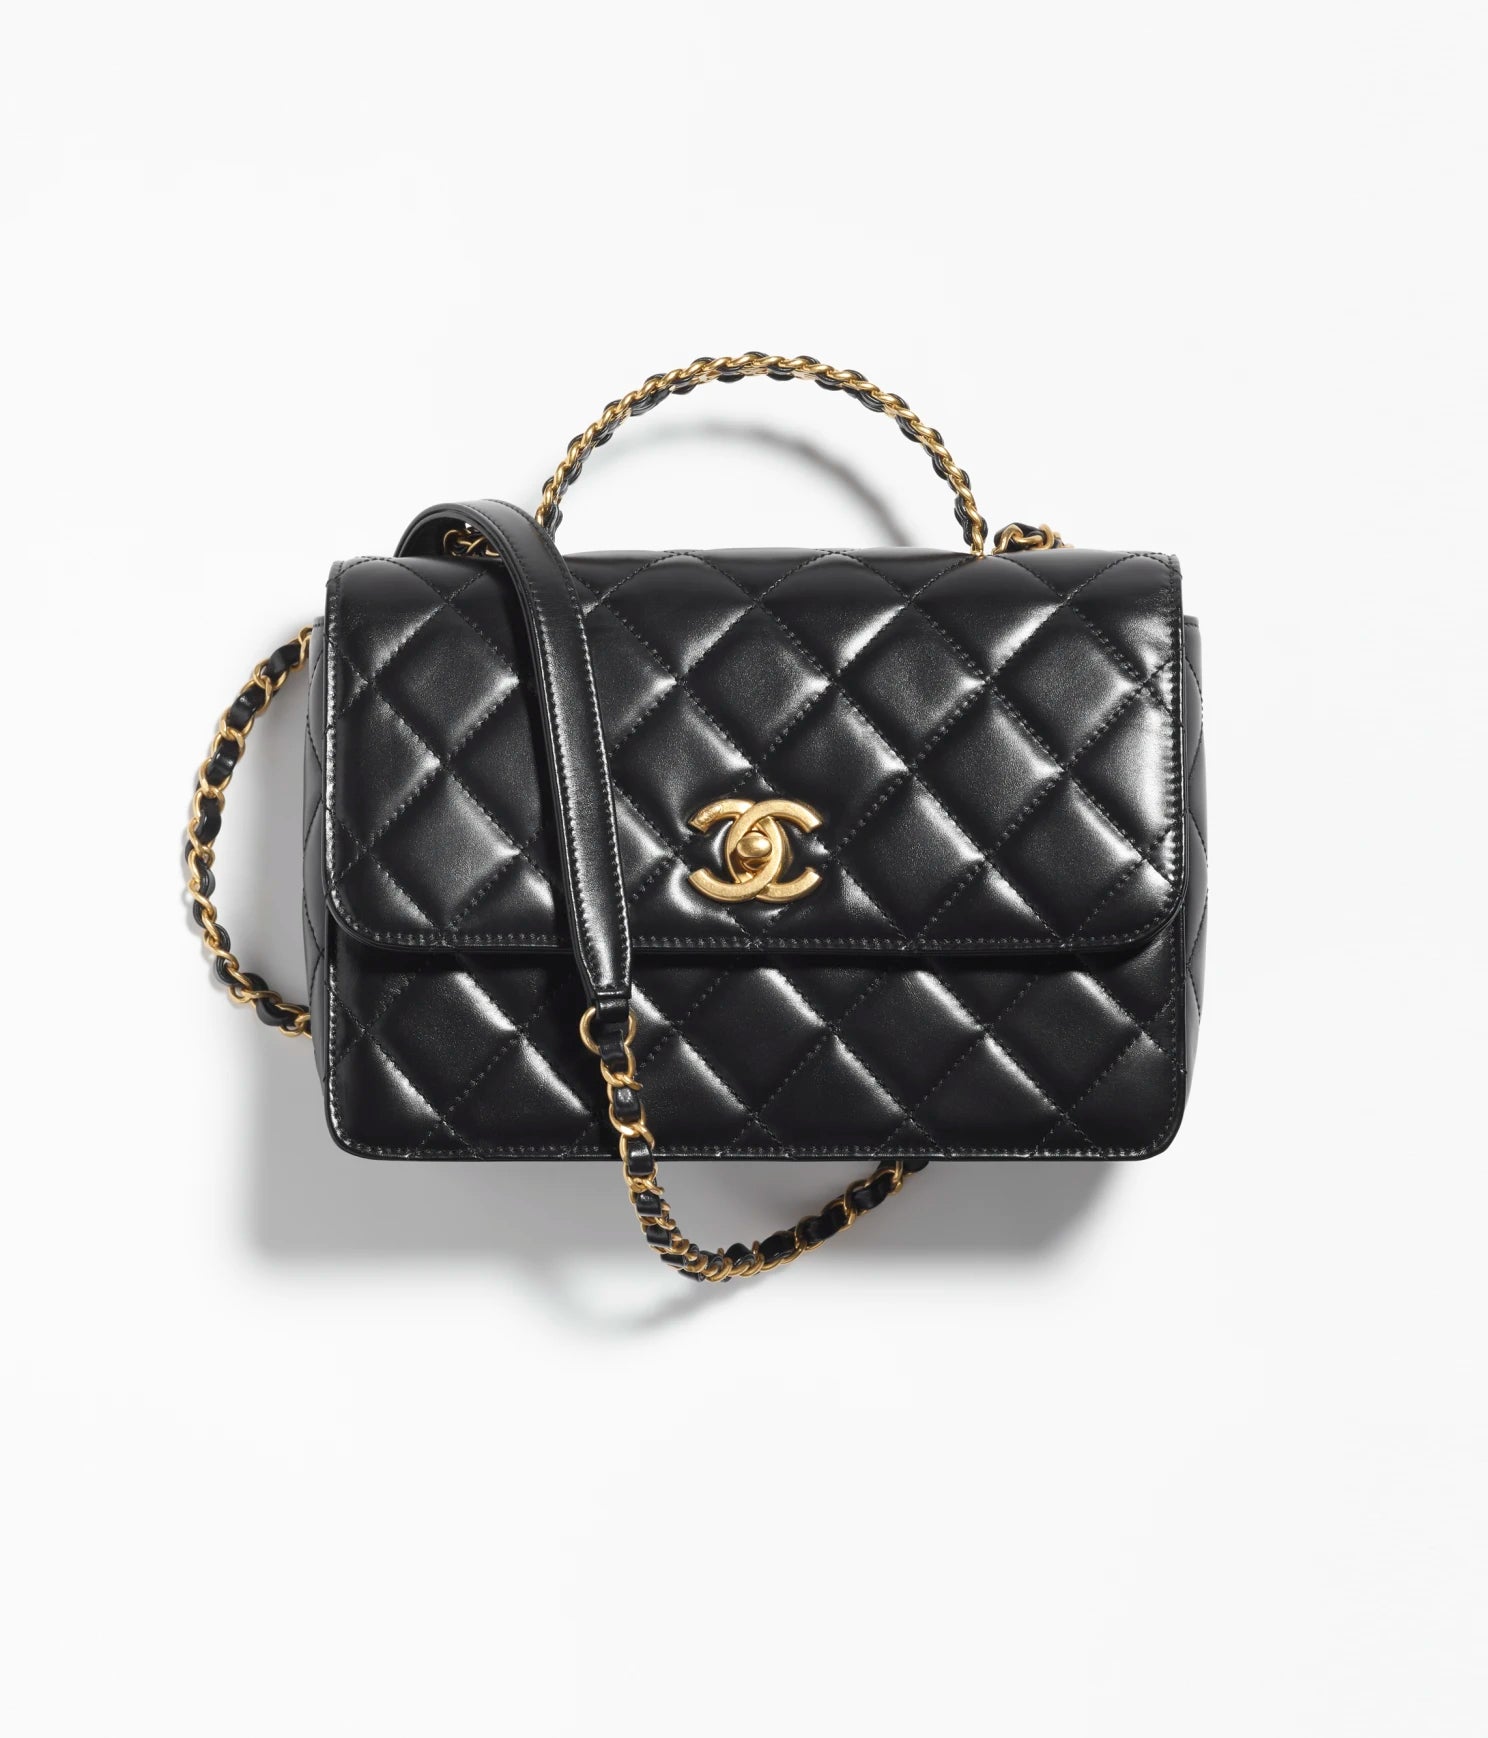 CHANEL SMALL FLAP BAG IN BLACK – VS Lifestyles